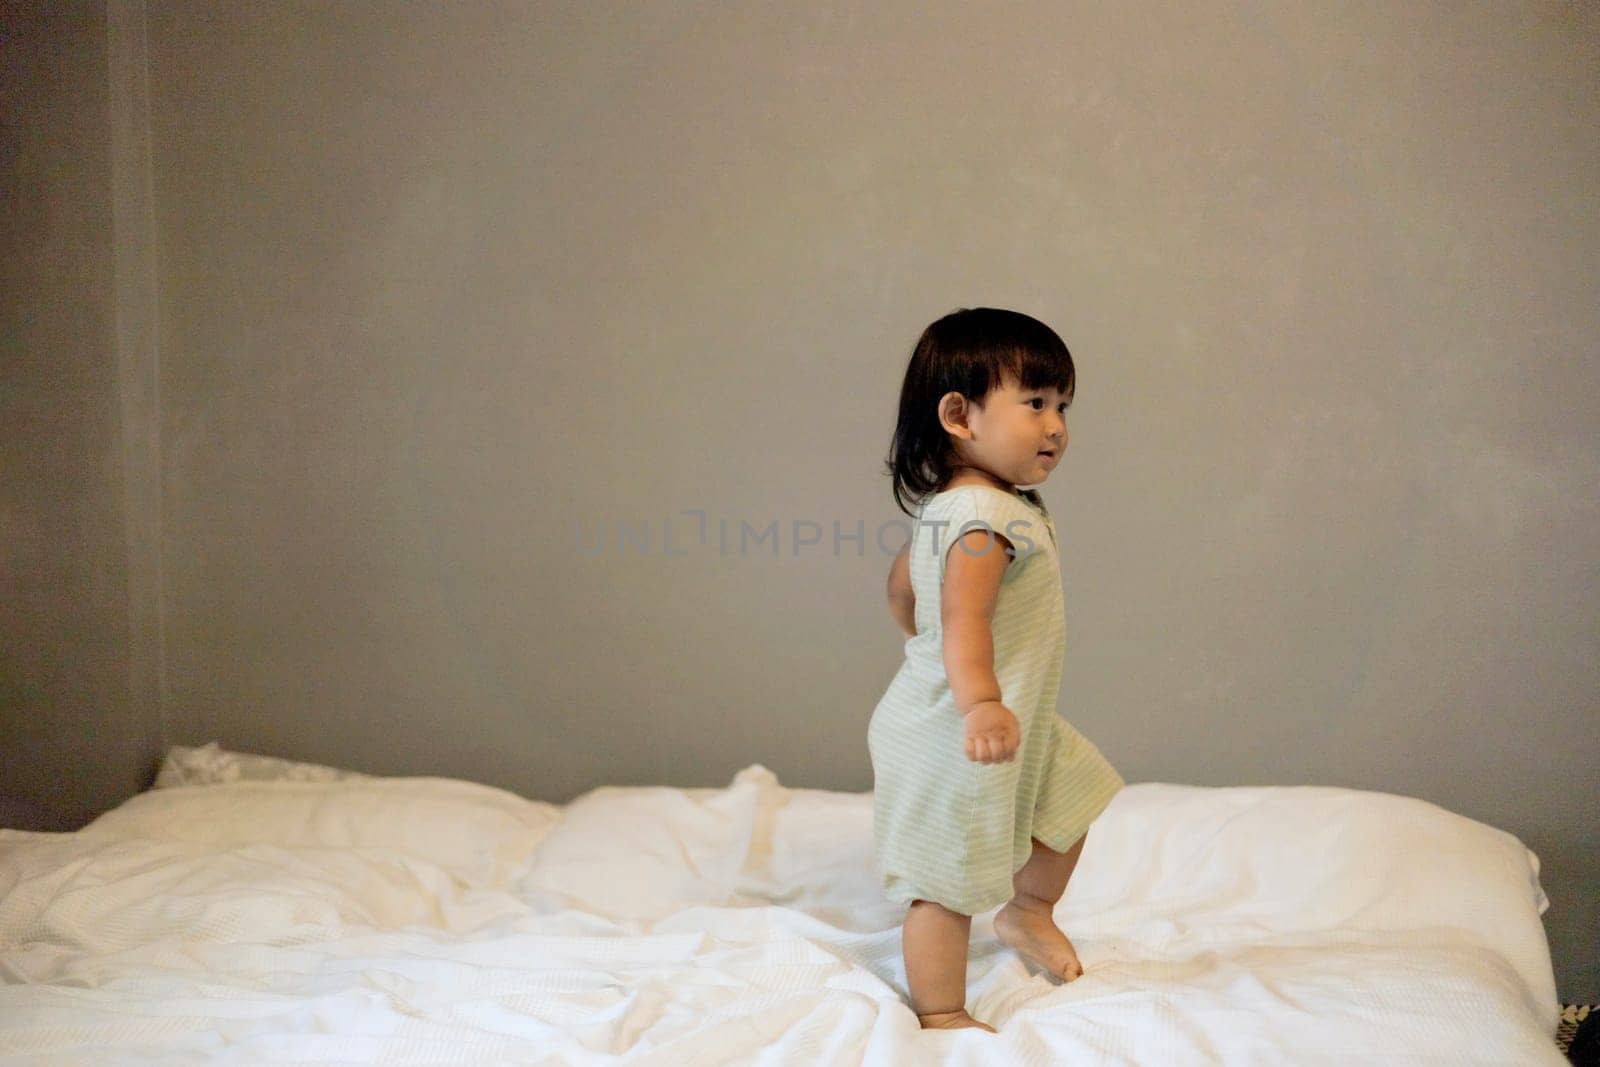 Little Boy Jumping On The Bed by urzine